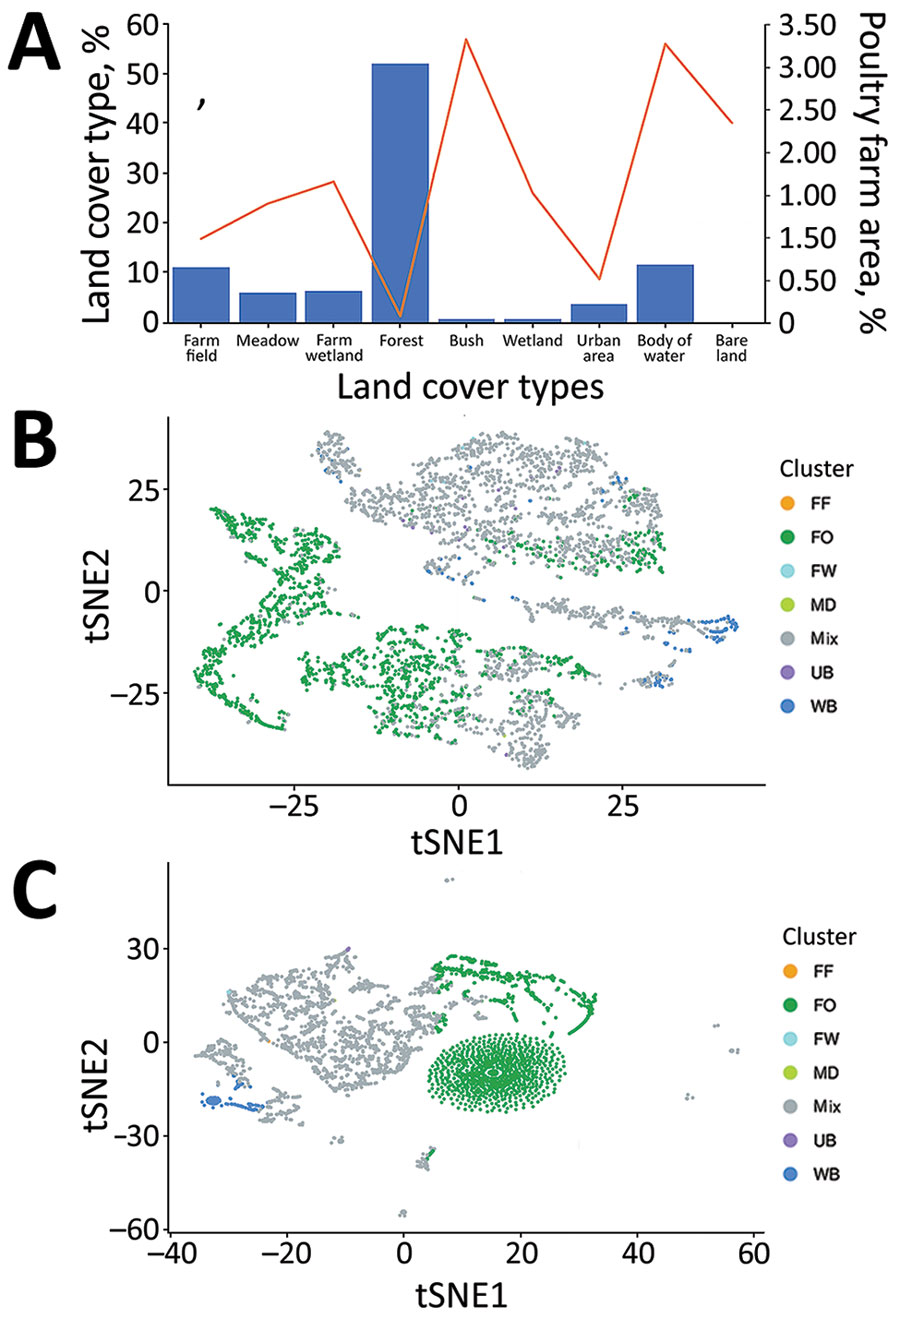 Land cover and bird distribution data for study of integrating citizen scientist data into the surveillance system for avian influenza virus, Taiwan. A) Percentages of 9 land-cover types in the total area of Taiwan main island (bars), area of poultry farms in the total area of indicated land-cover types (line). B, C) The clustering pattern of the area of each land-cover type (B) and the propensity score for each bird species from 3,764 grids partitioned by 3-km × 3-km squares of the main island of Taiwan (C), are based on principal component analysis and tSNE dimension reduction. Clusters are colored by the land-cover type as shown in panel A. For 4,762 grids, if 1 specific land-cover type is composed of >90% in the grid, such grid will be regarded as such specific land-cover type. Otherwise, it will be labeled as the mixed land-cover type. The labels of clusters in panels B and C are consistent with those in panel A. FF, farm field; FO, forest; FW, farm wetland; MD, meadow; mix, mixed land-cover types; tSNE, t-distributed stochastic neighbor embedding UB, urban; WB, water body. 